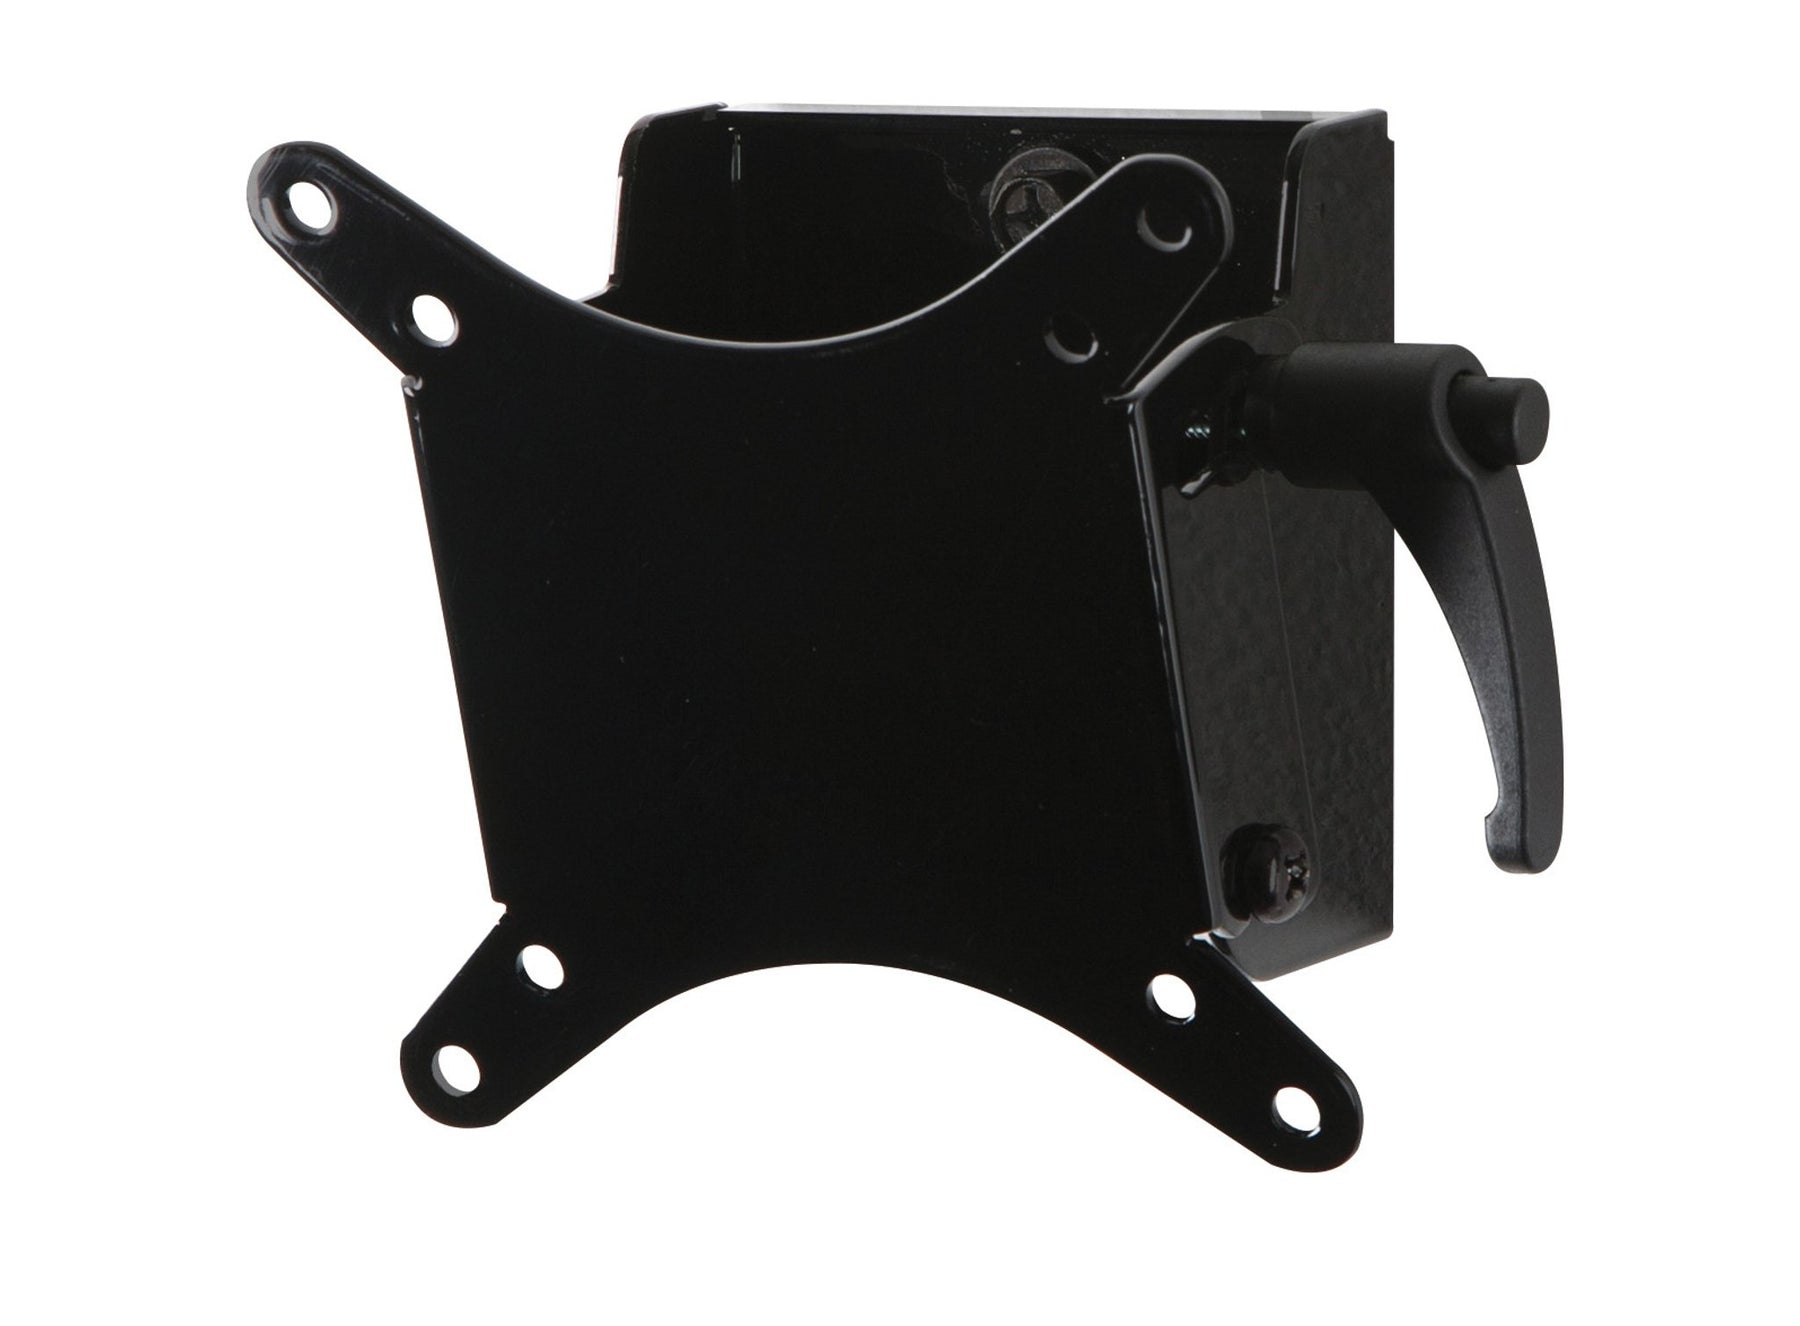 Peerless PARAMOUNT Universal Tilt Wall Mount PT630 - Mounting Kit (wall plate, mounting plate) - for LCD TV - steel - glossy black - screen size: 10"-24"